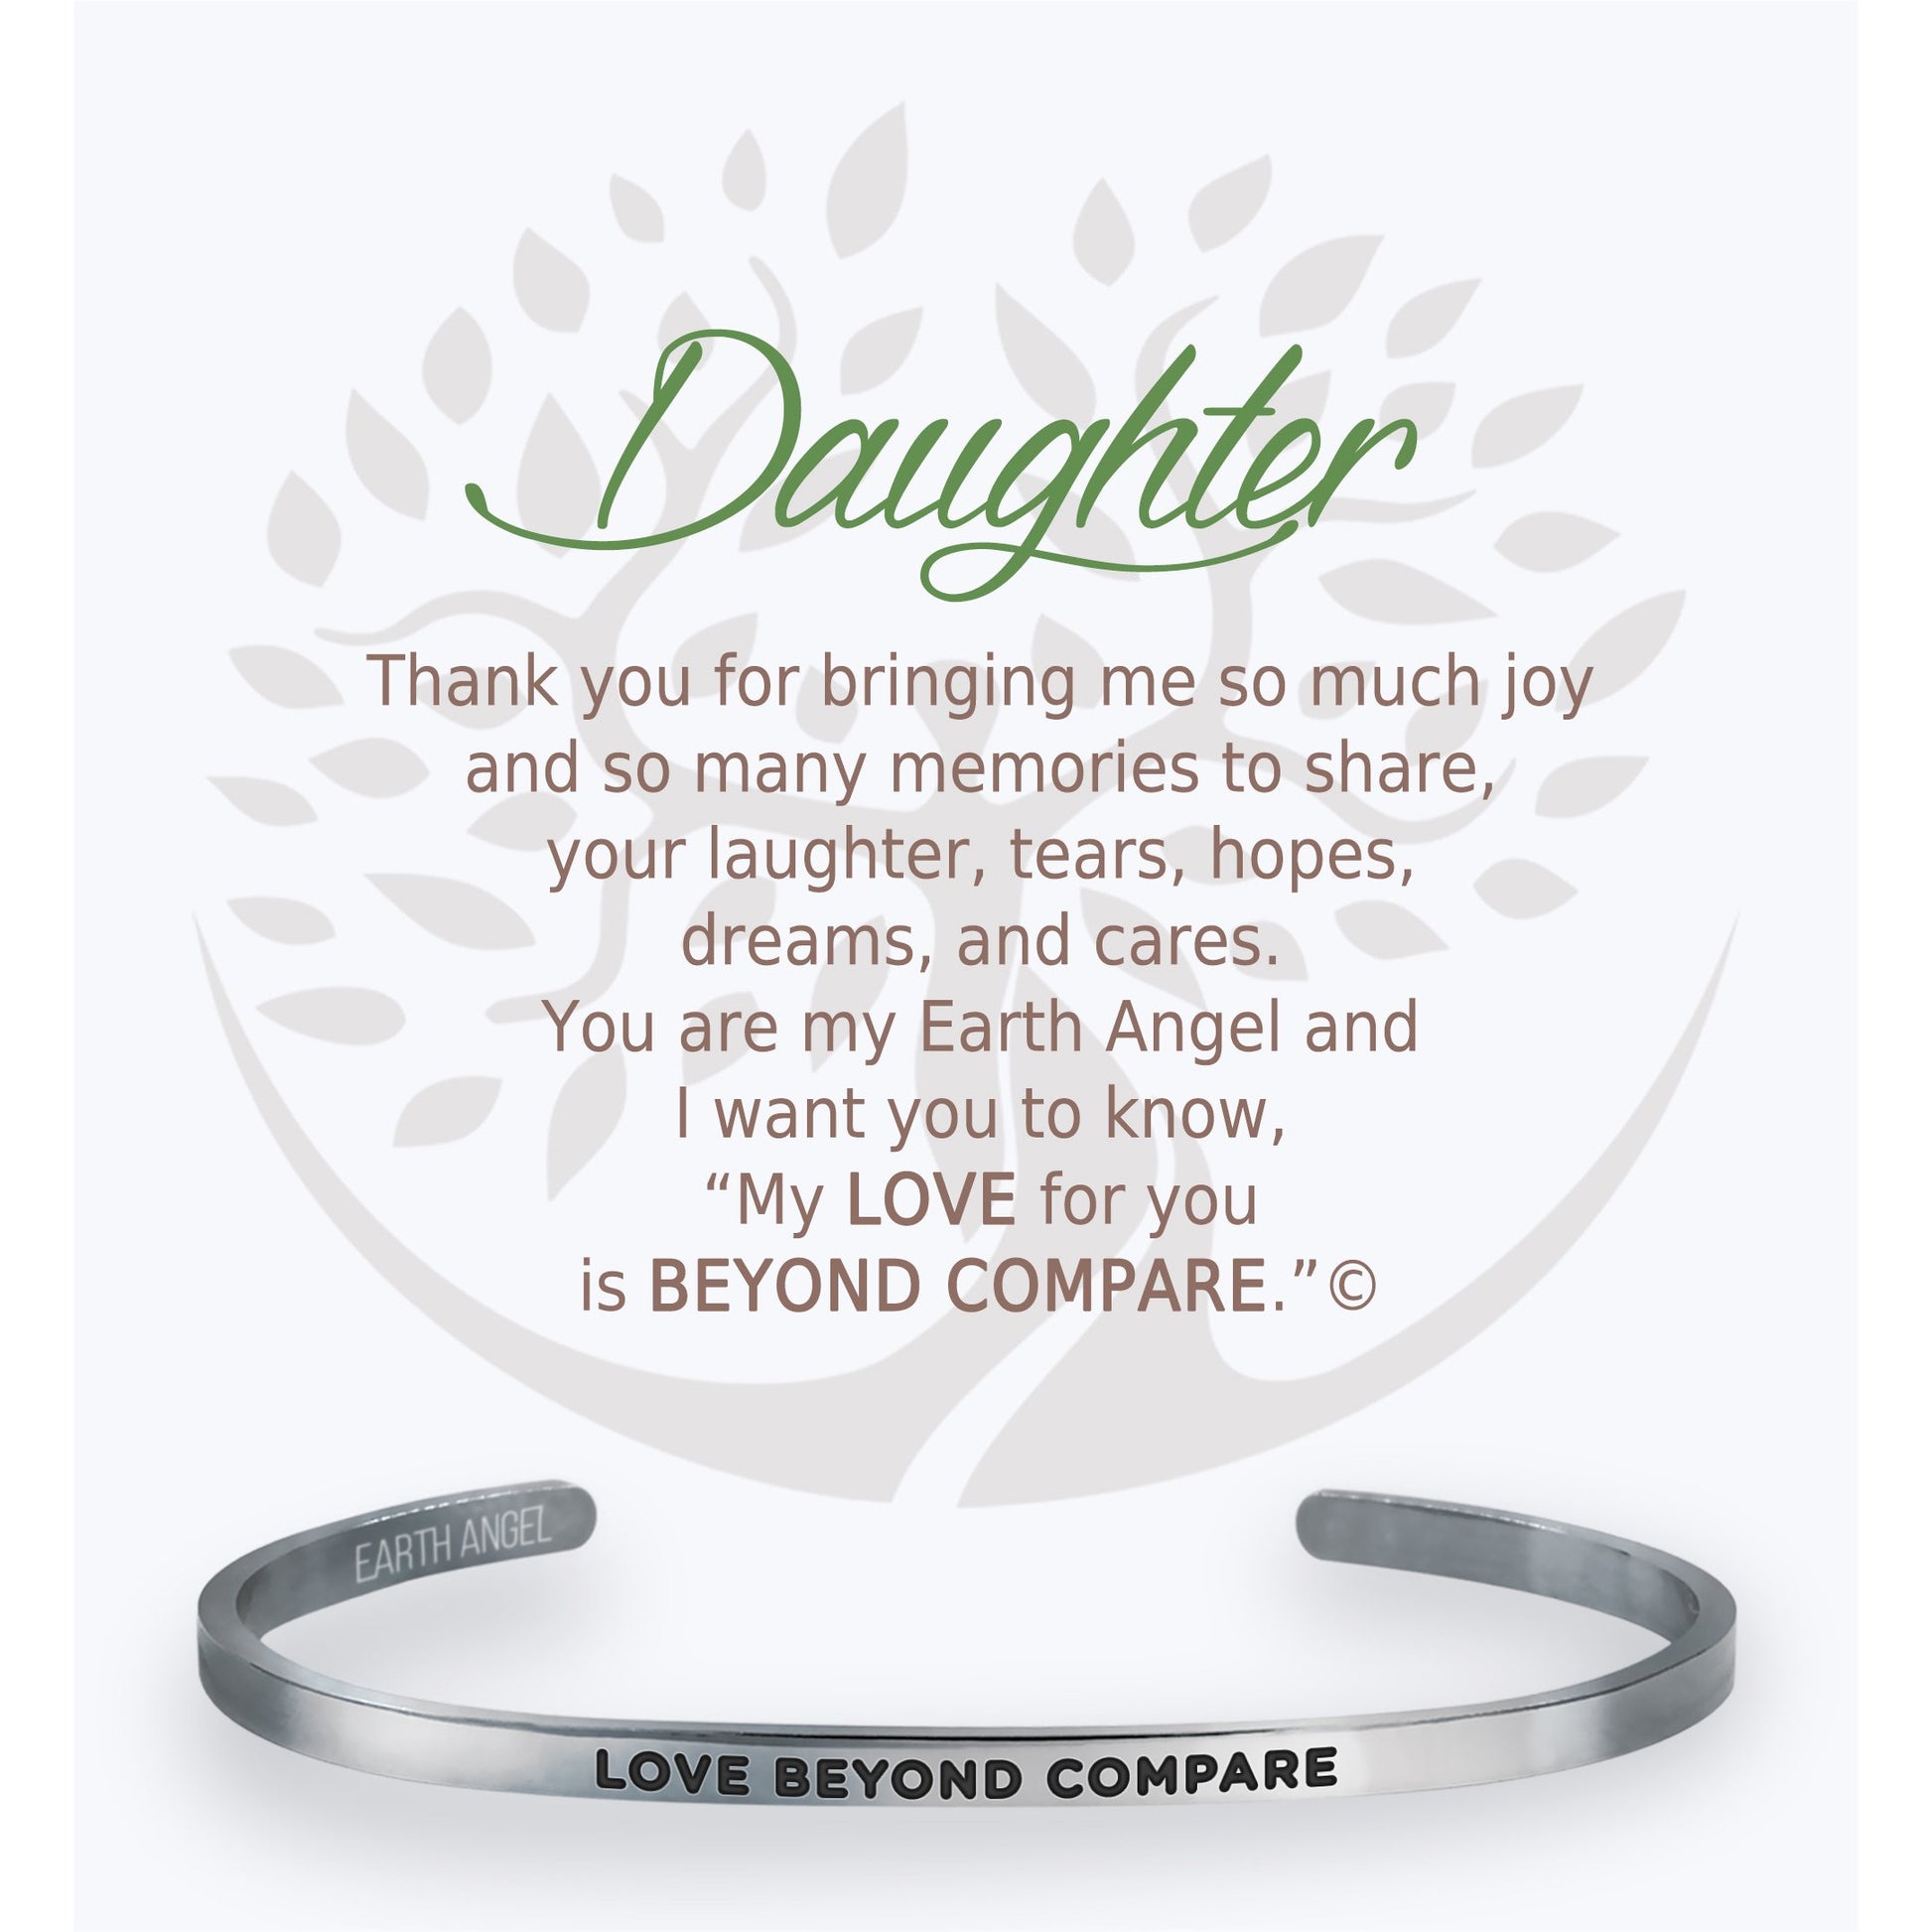 Each cuff bracelet is from a line of high quality stainless-steel. Our bracelets each include a gift box and card of caring instructions making them the perfect present for all “The Angels of Our Lives”.  Choose from:  Mom, Sister, Friend, Teacher, Daughter, Grand-daughter, Grandma, Strength, Nurse, Birthday, Love, Proud of You